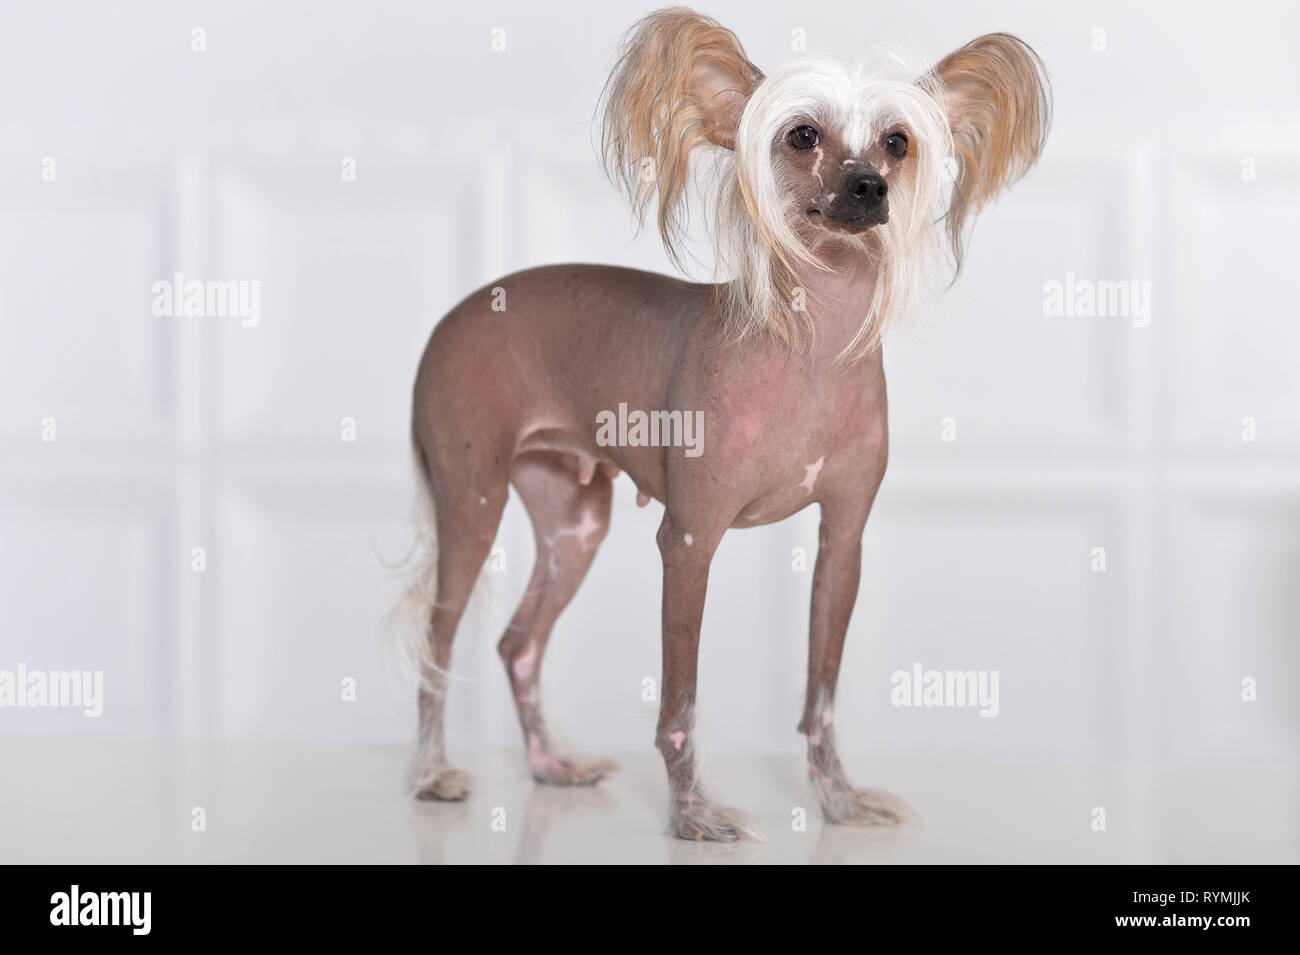 Close-up portrait of cute chinese crested dog on background Stock Photo